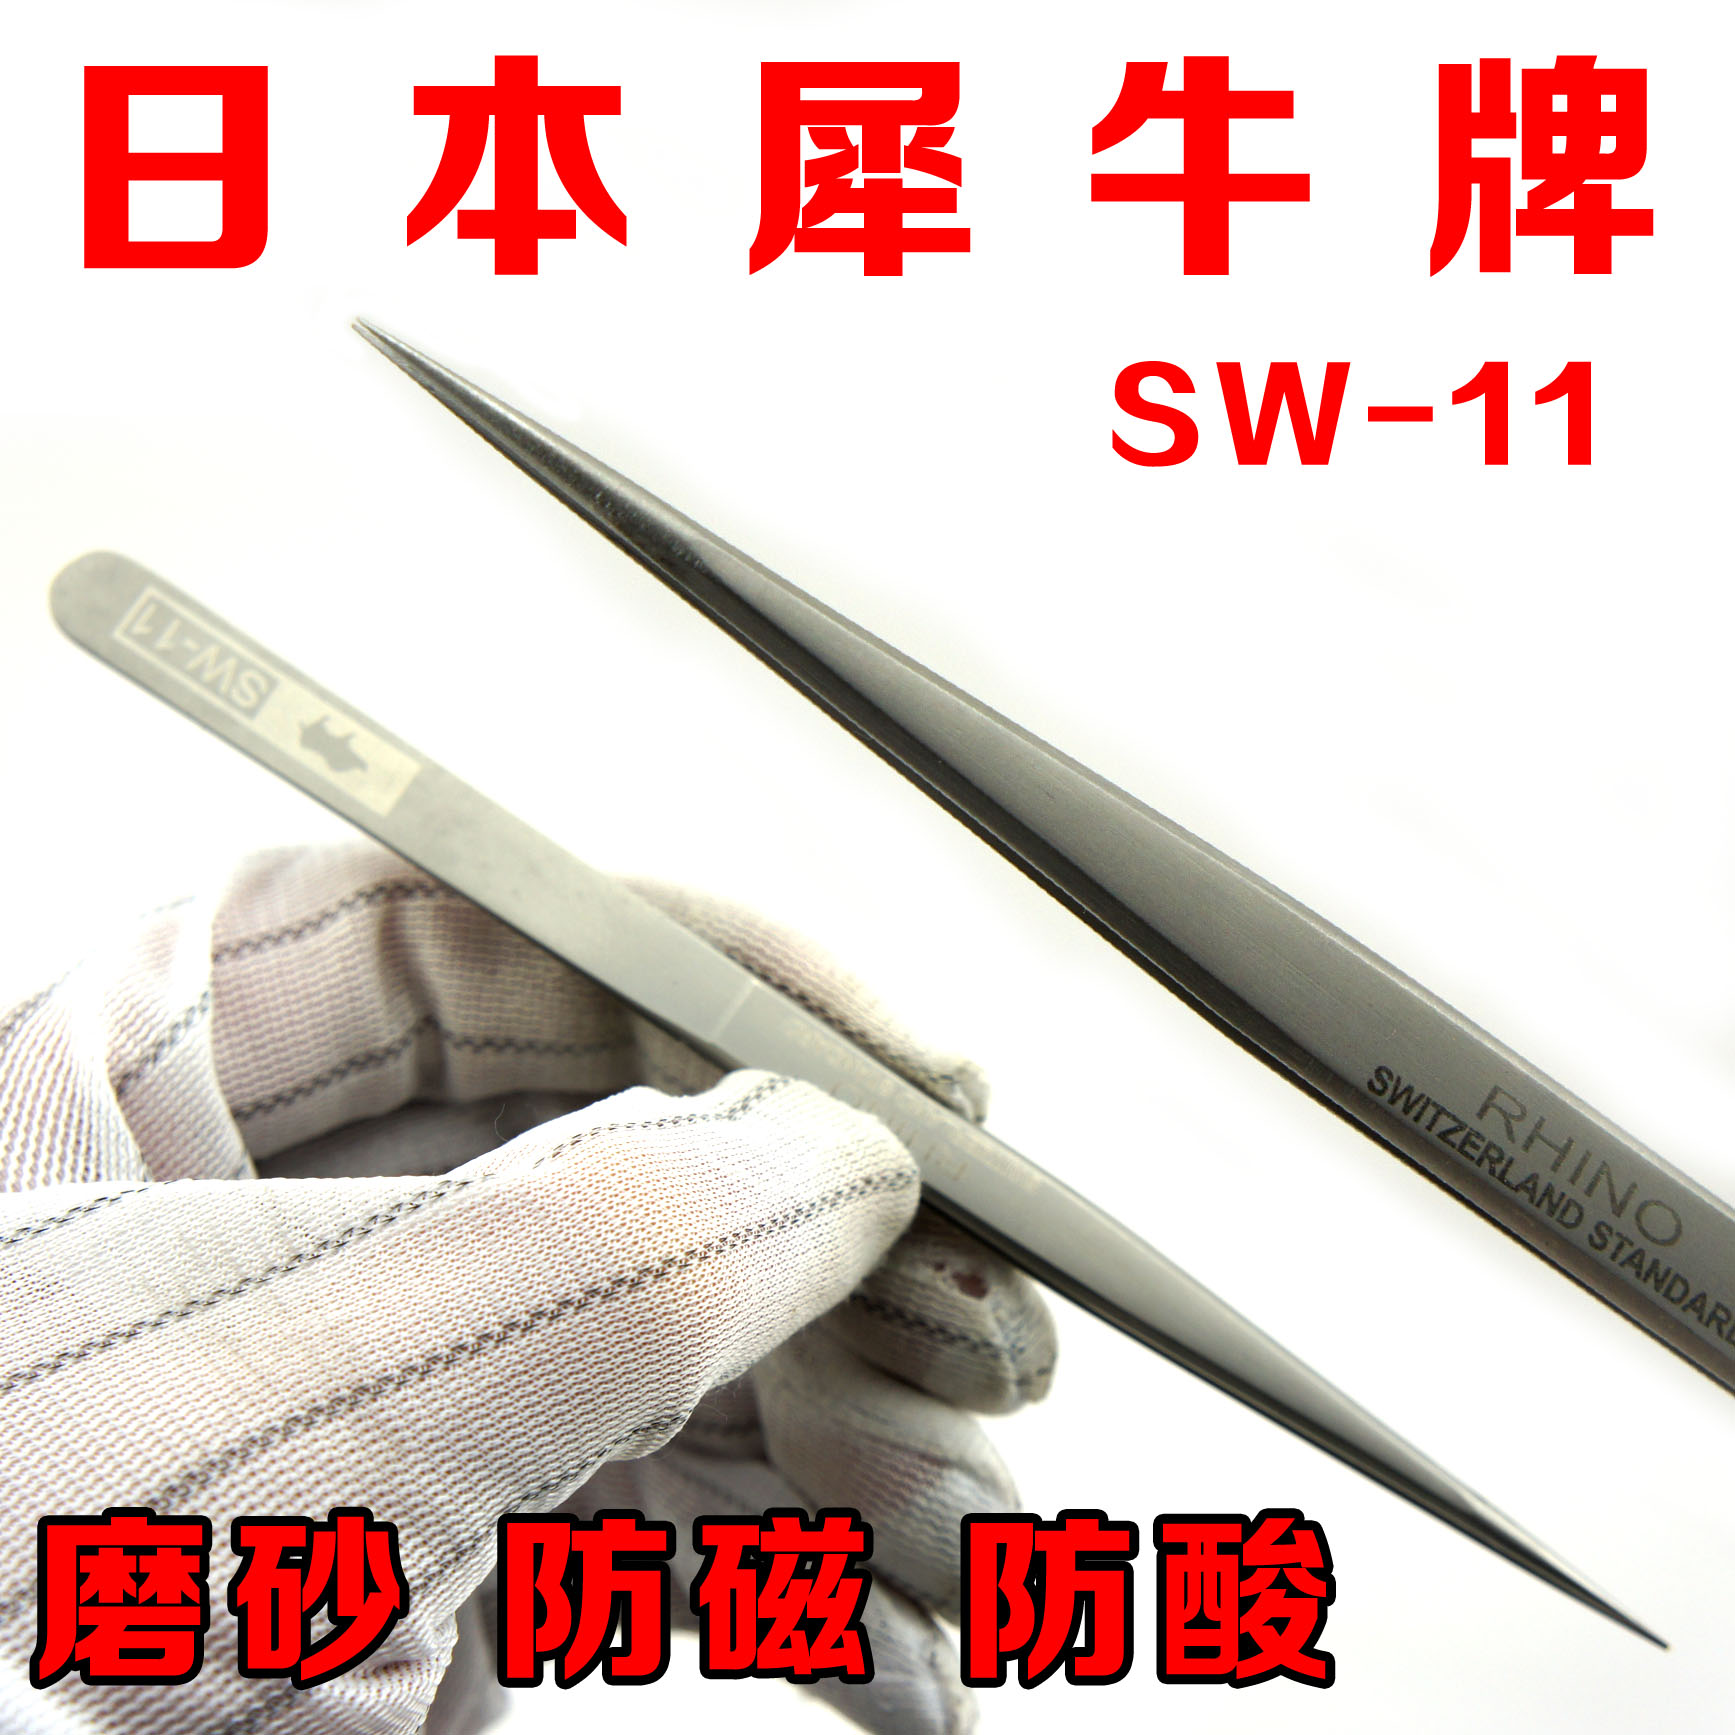 Japan imports rhinoceros SW-11 tweezers frosted anti-magnetic acid-proof stainless steel tweezers ultra-hard tip clamps